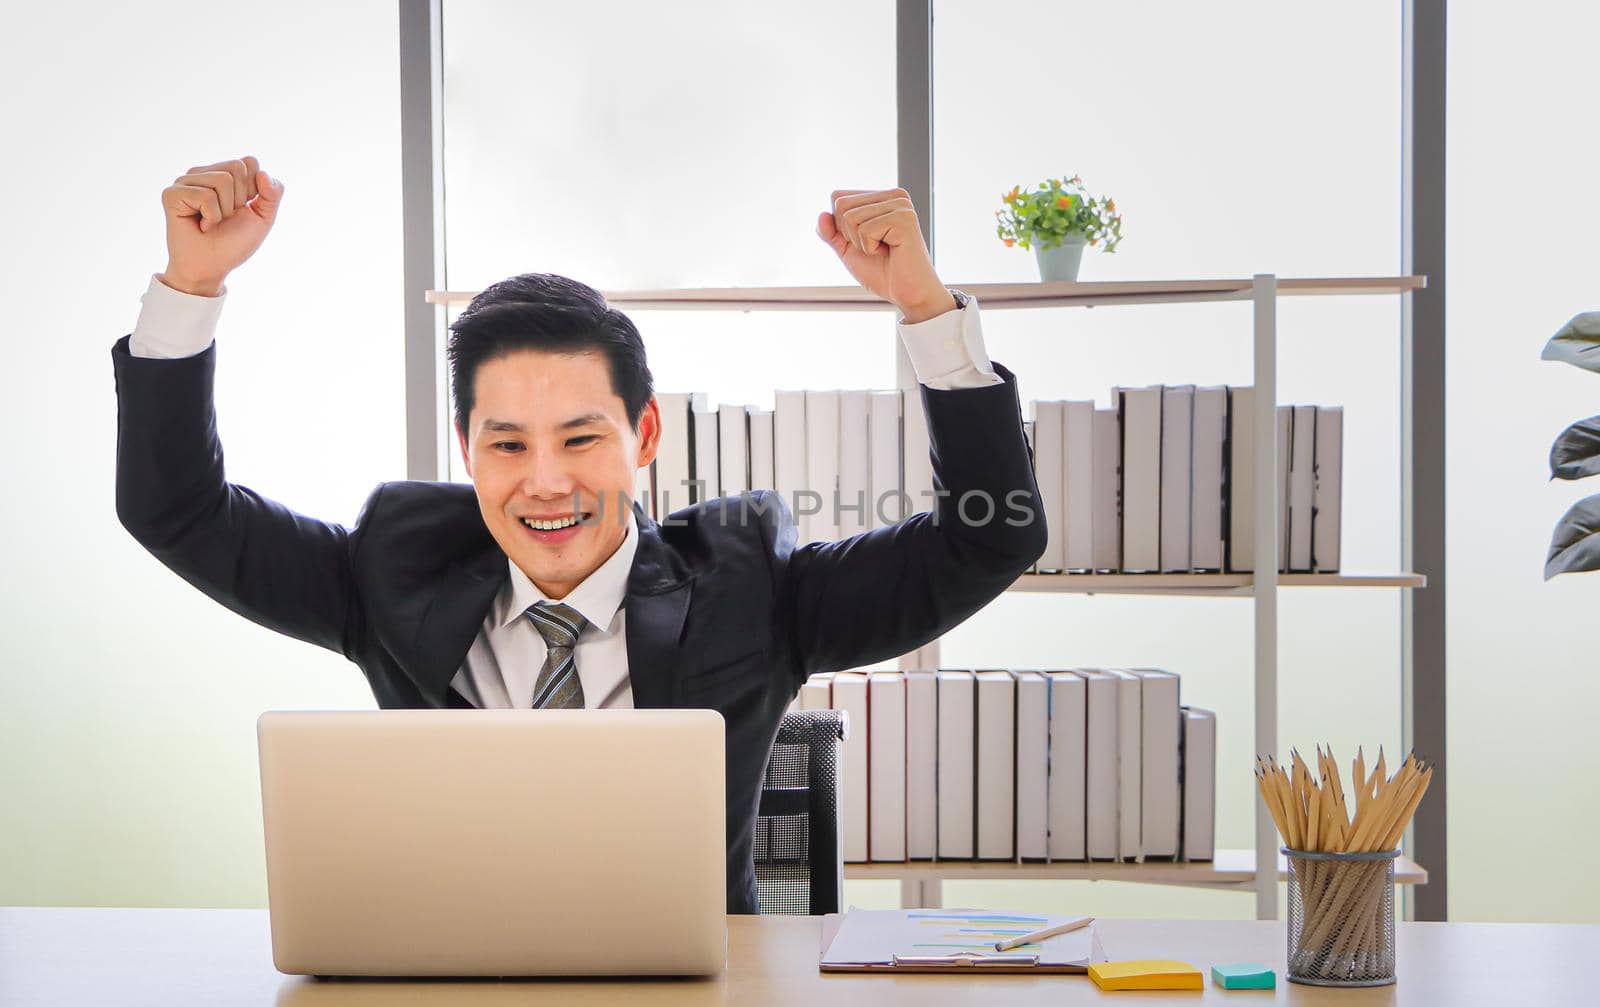 Portrait of an Asian businessman sitting at a table, looking at the PC screen, smiling and raising his hands on both sides, showing the joy of receiving an amazing fine rice celebrating success.